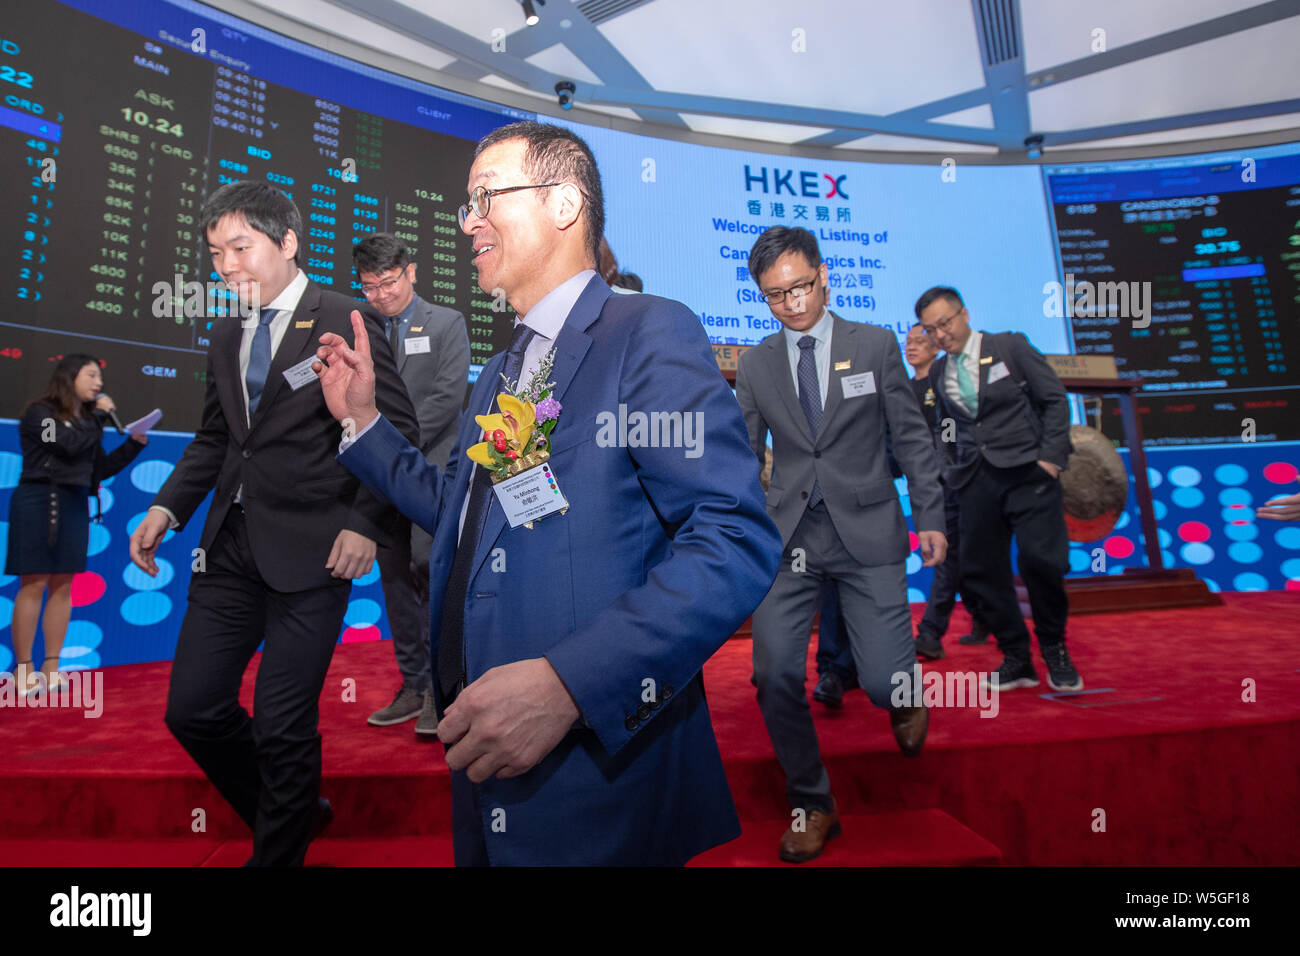 Michael Yu Minhong, founder and CEO of New Oriental Education & Technology Group, poses during the ceremony for the listing of Chinese online educator Stock Photo